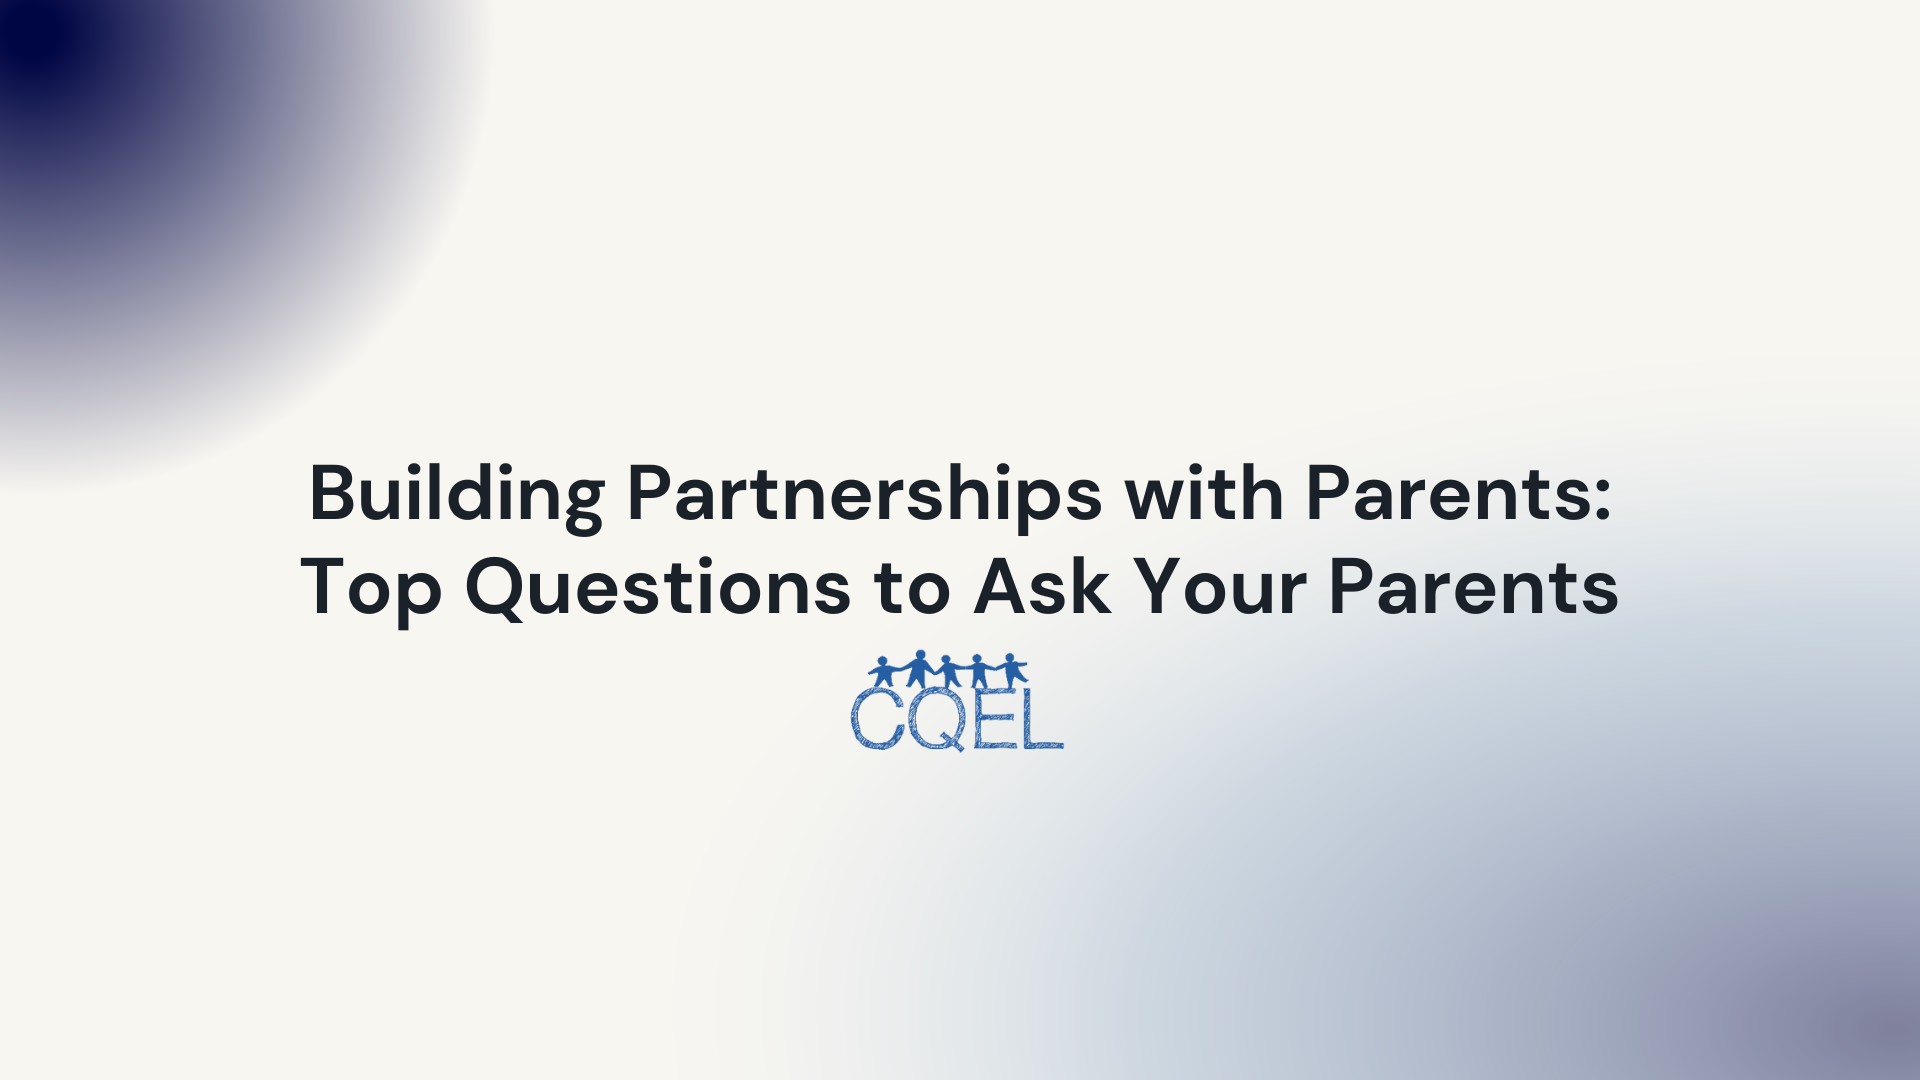 Building Partnerships with Parents: Top Questions to Ask Your Parents